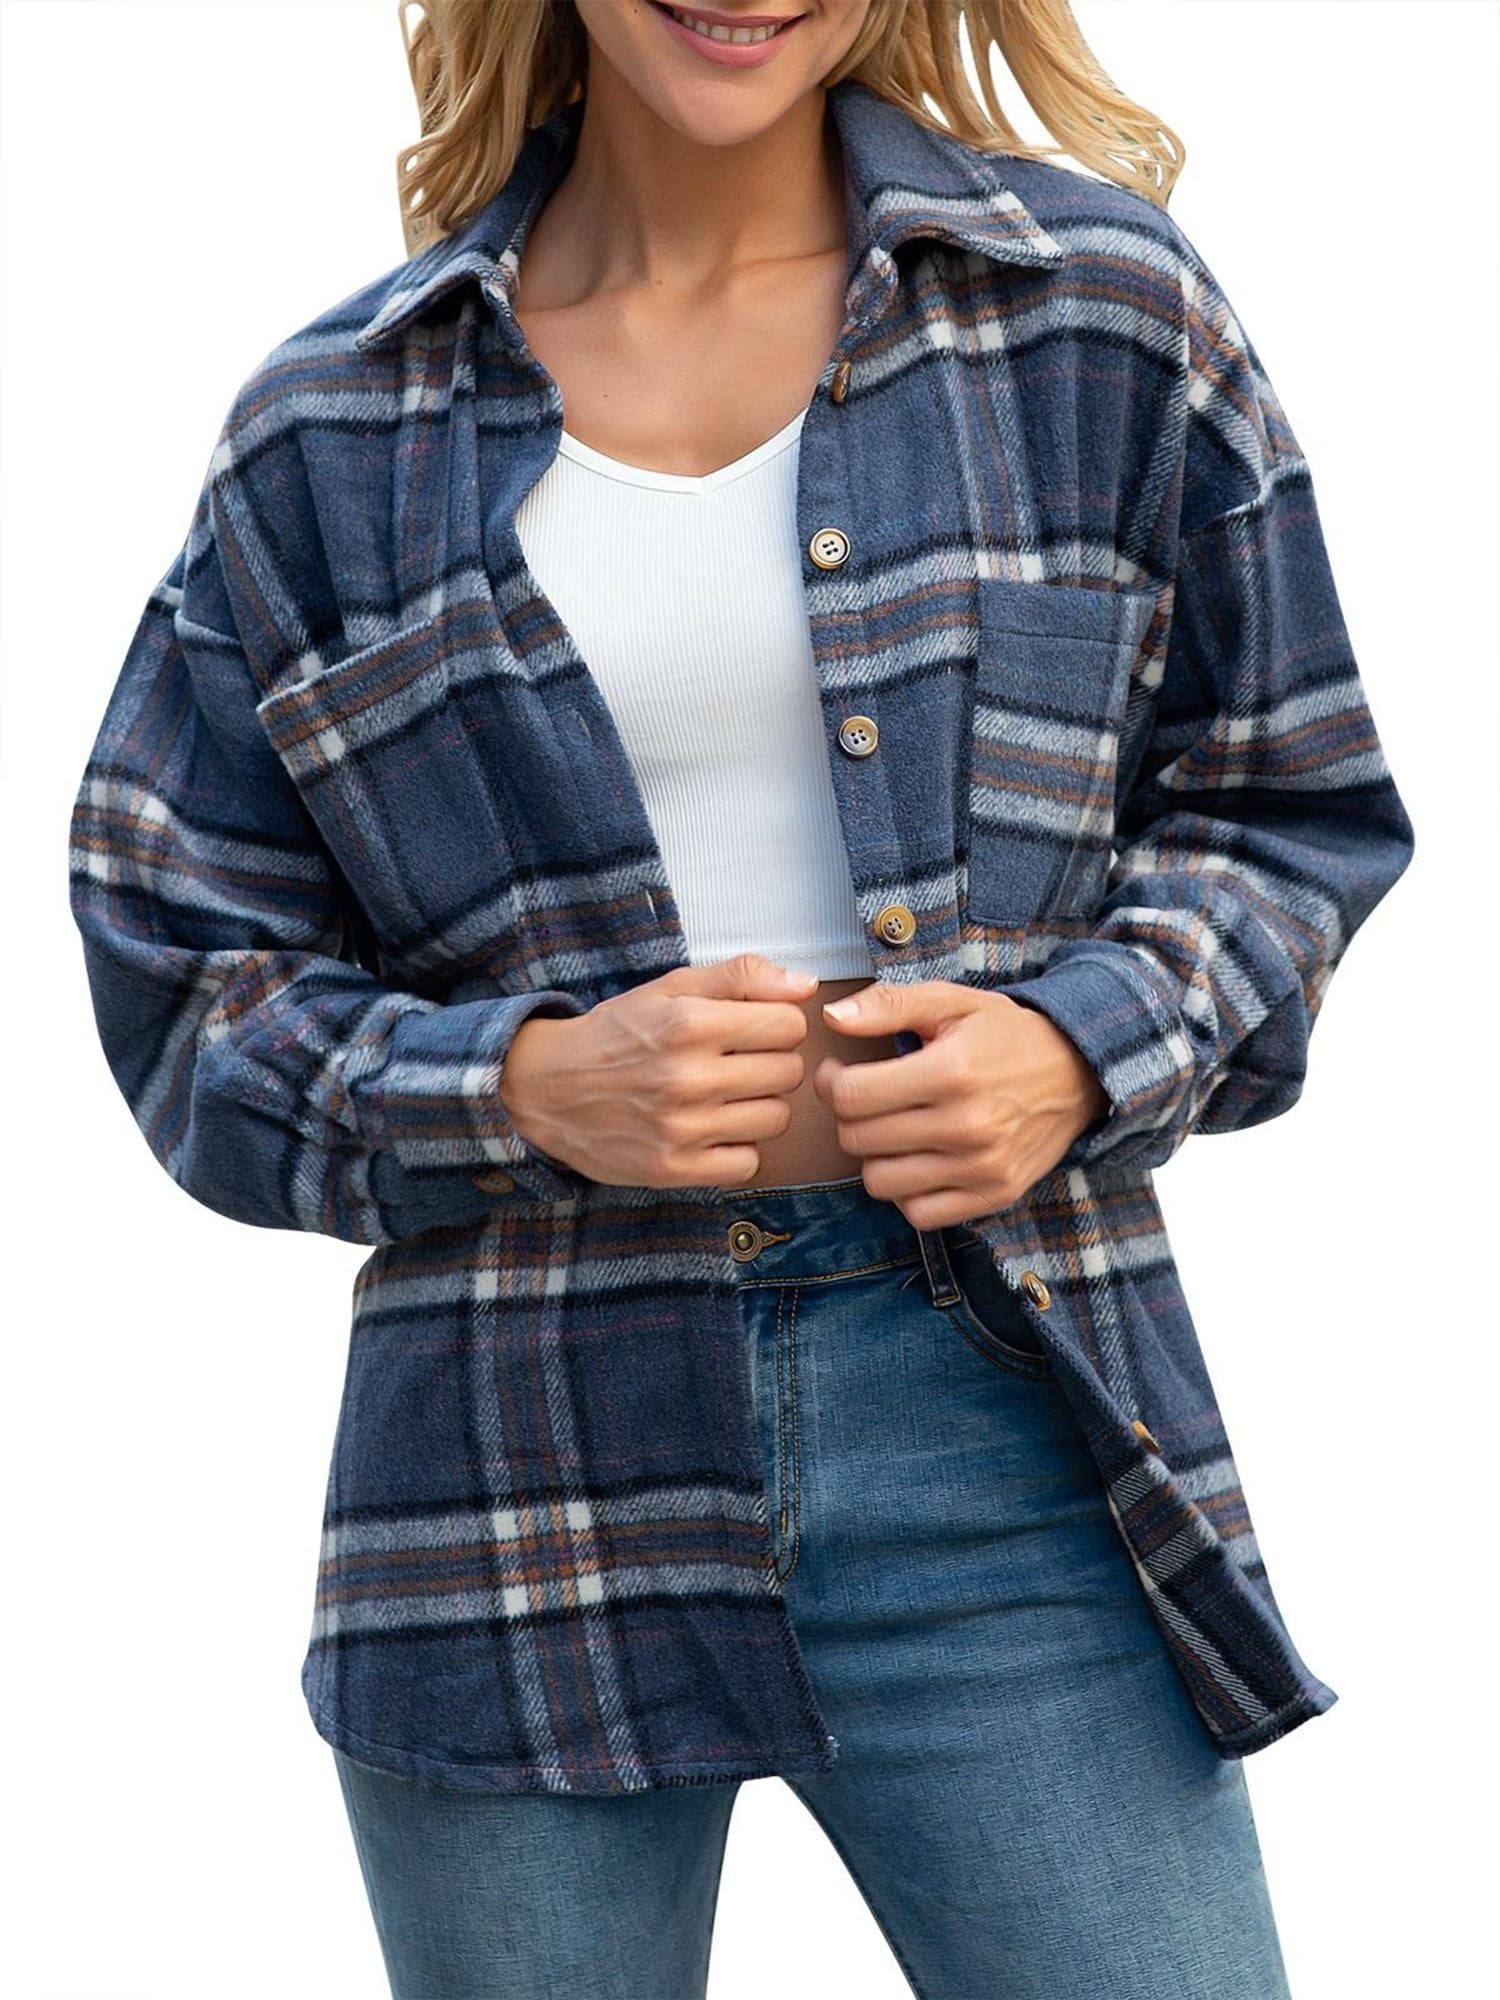 Plaid Flannel Shirts for Women Oversized Vintage Long Sleeve Button ...